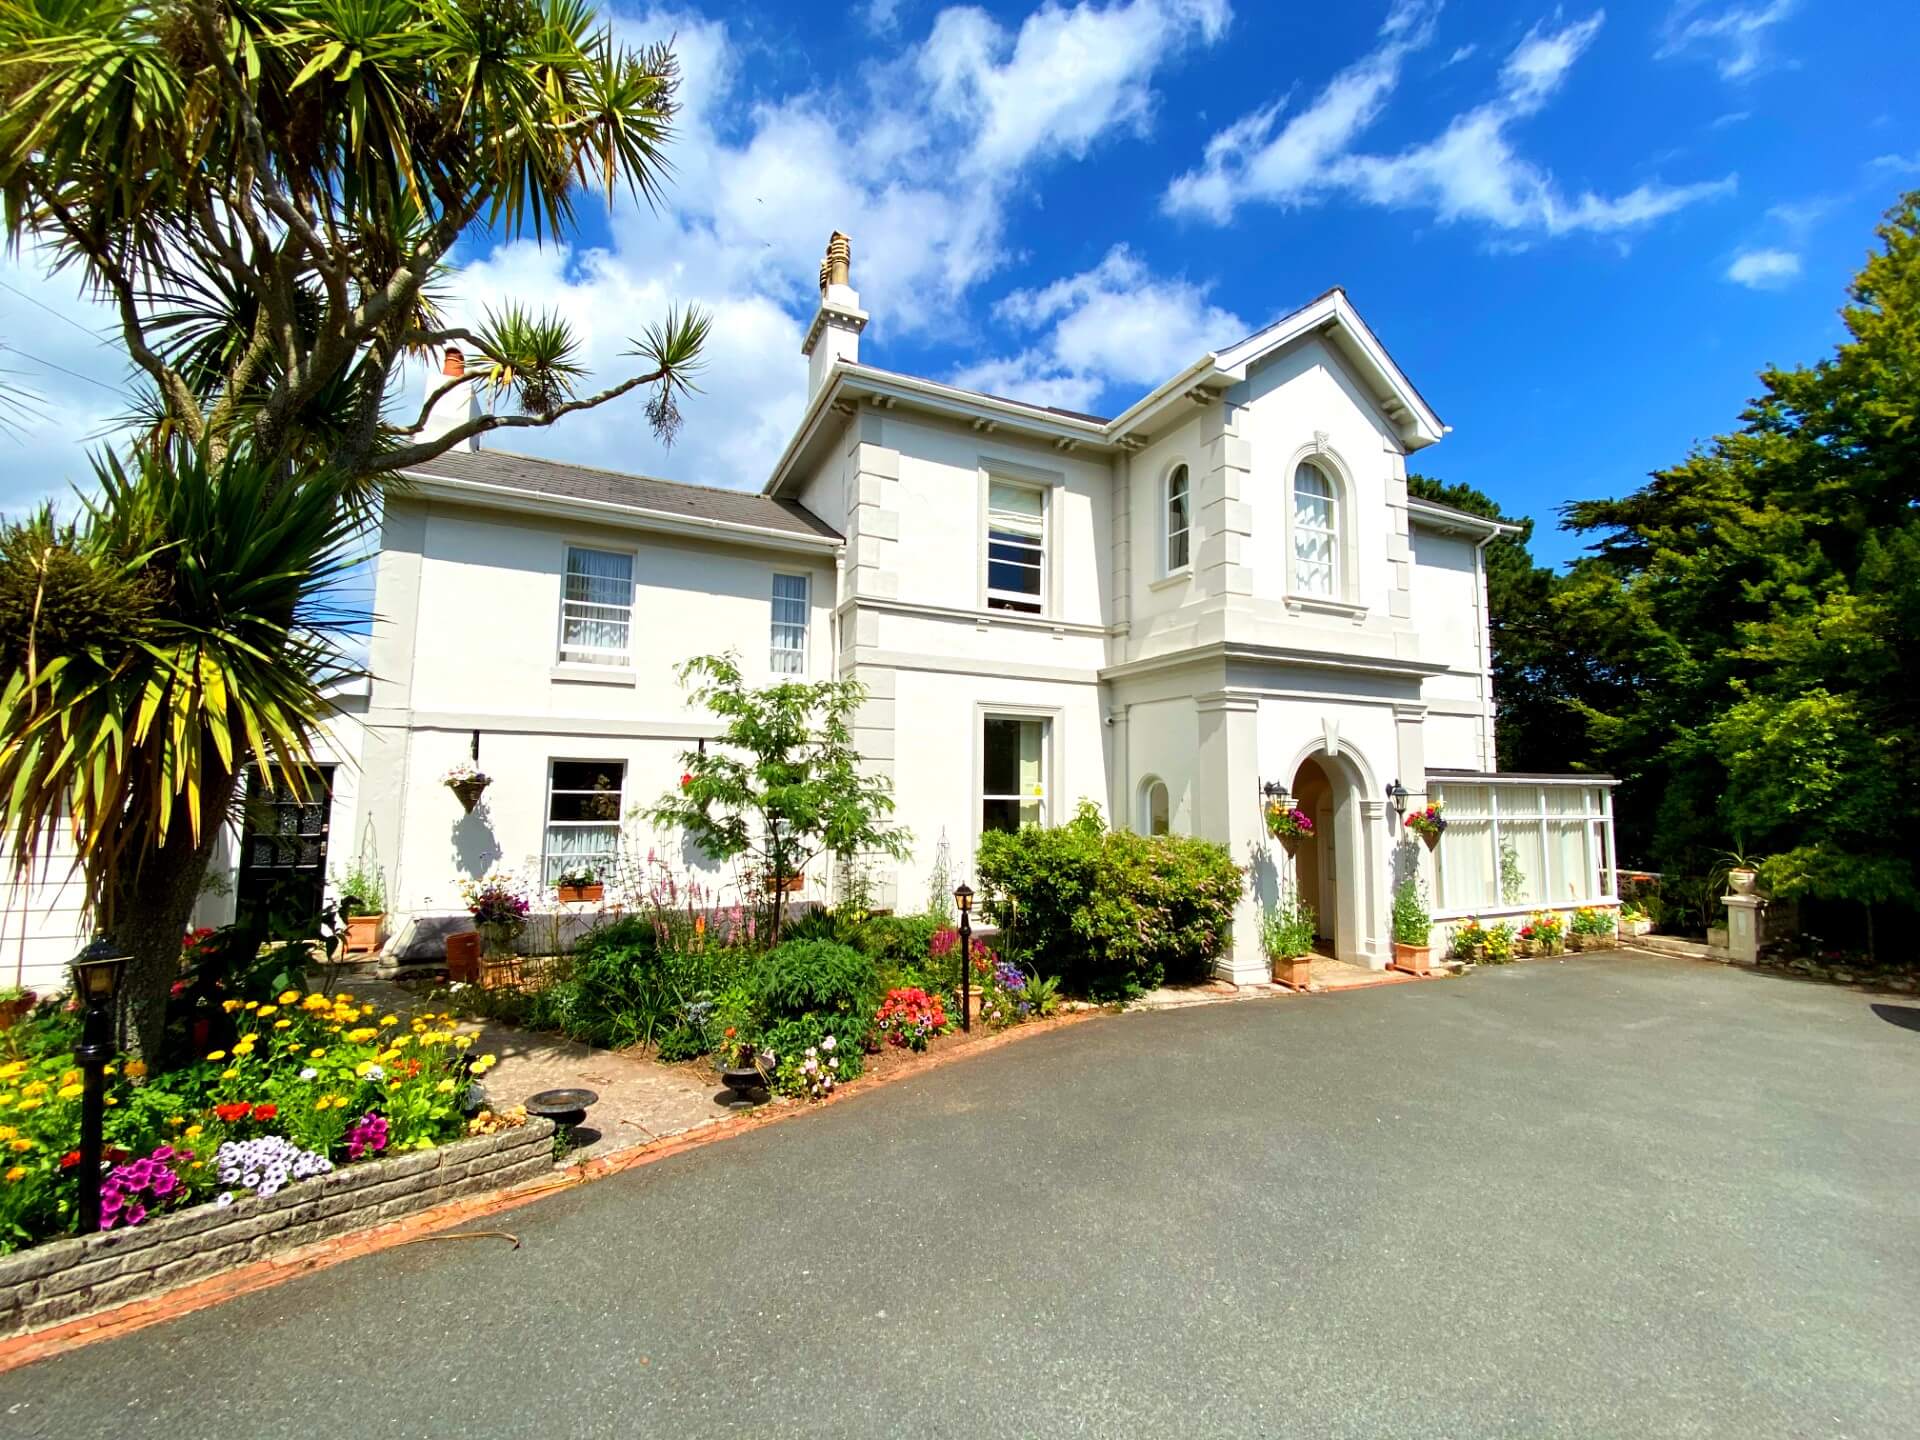 The Muntham Luxury Apartments and Town House, Torquay